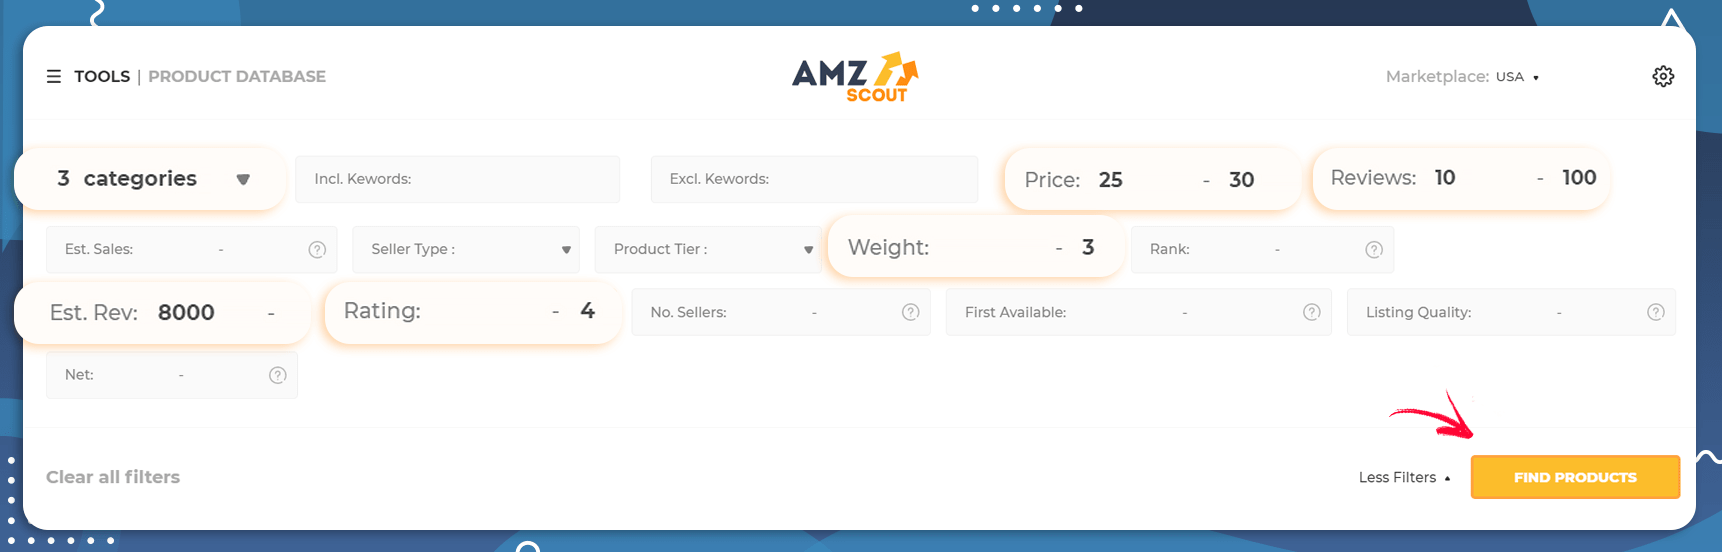 Setting Filters in the AMZScout Product Database